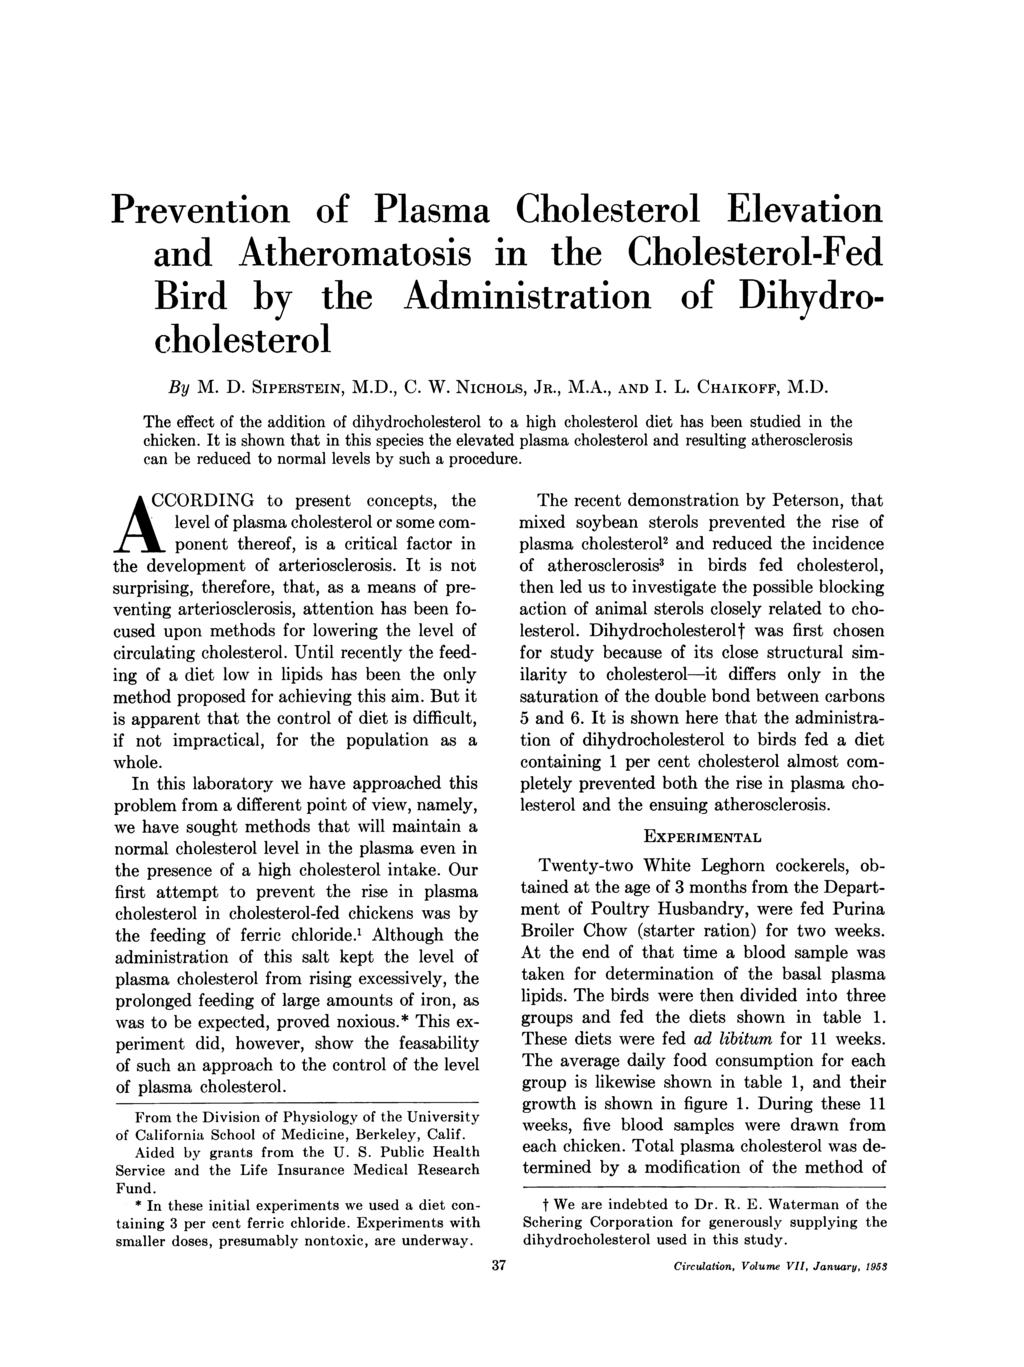 Prevention of Plasma Cholesterol Elevation and Atheromatosis in the Cholesterol-Fed Bird by the Administration of Dihydrocholesterol By M. D. SIPERSTEIN, M.D., C. W. NICHOLS, JR., M.A., AND I. L.